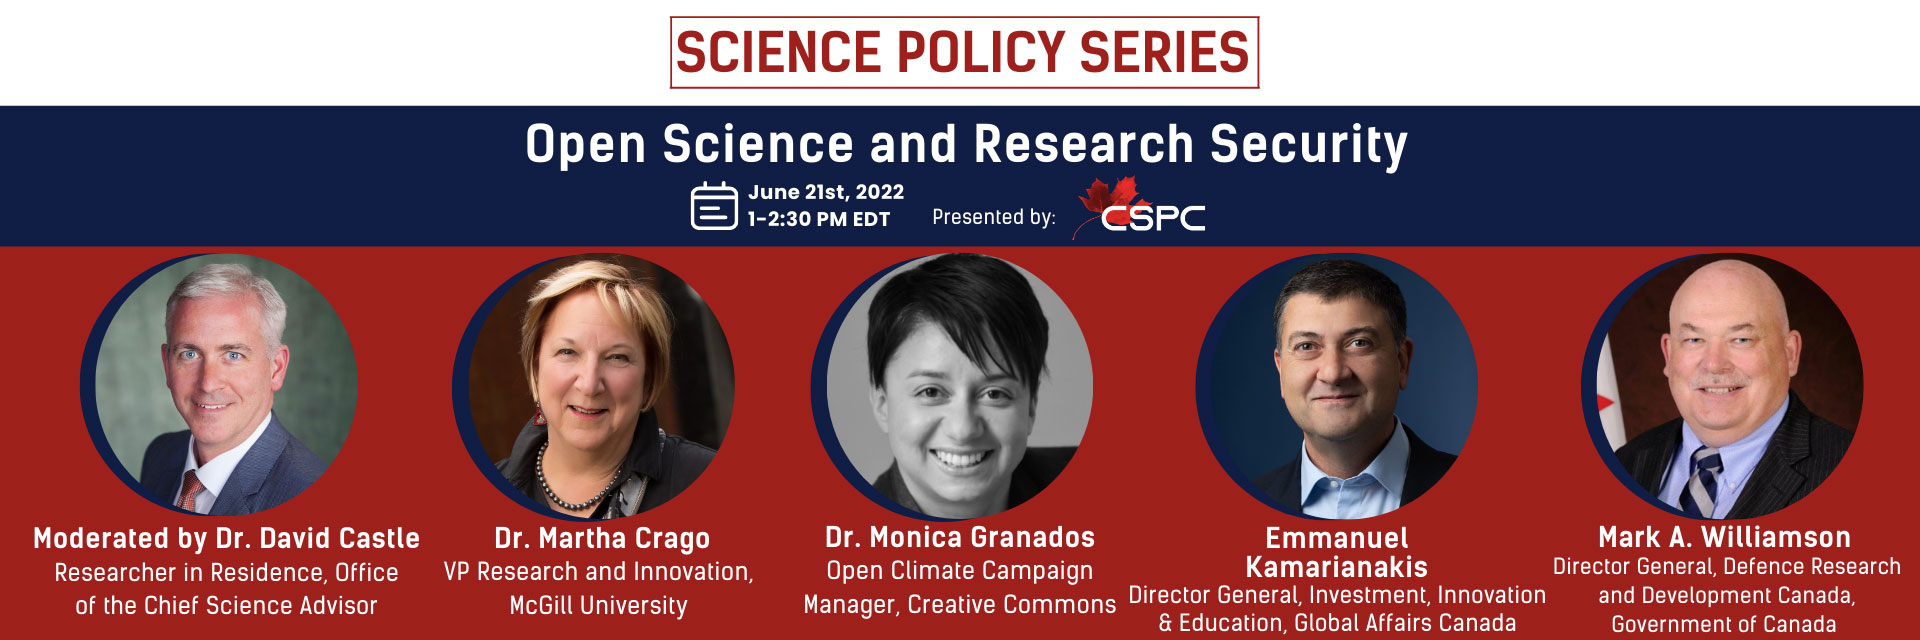 Banner for Open Science vs. Research Security event on June 21 at 1 PM